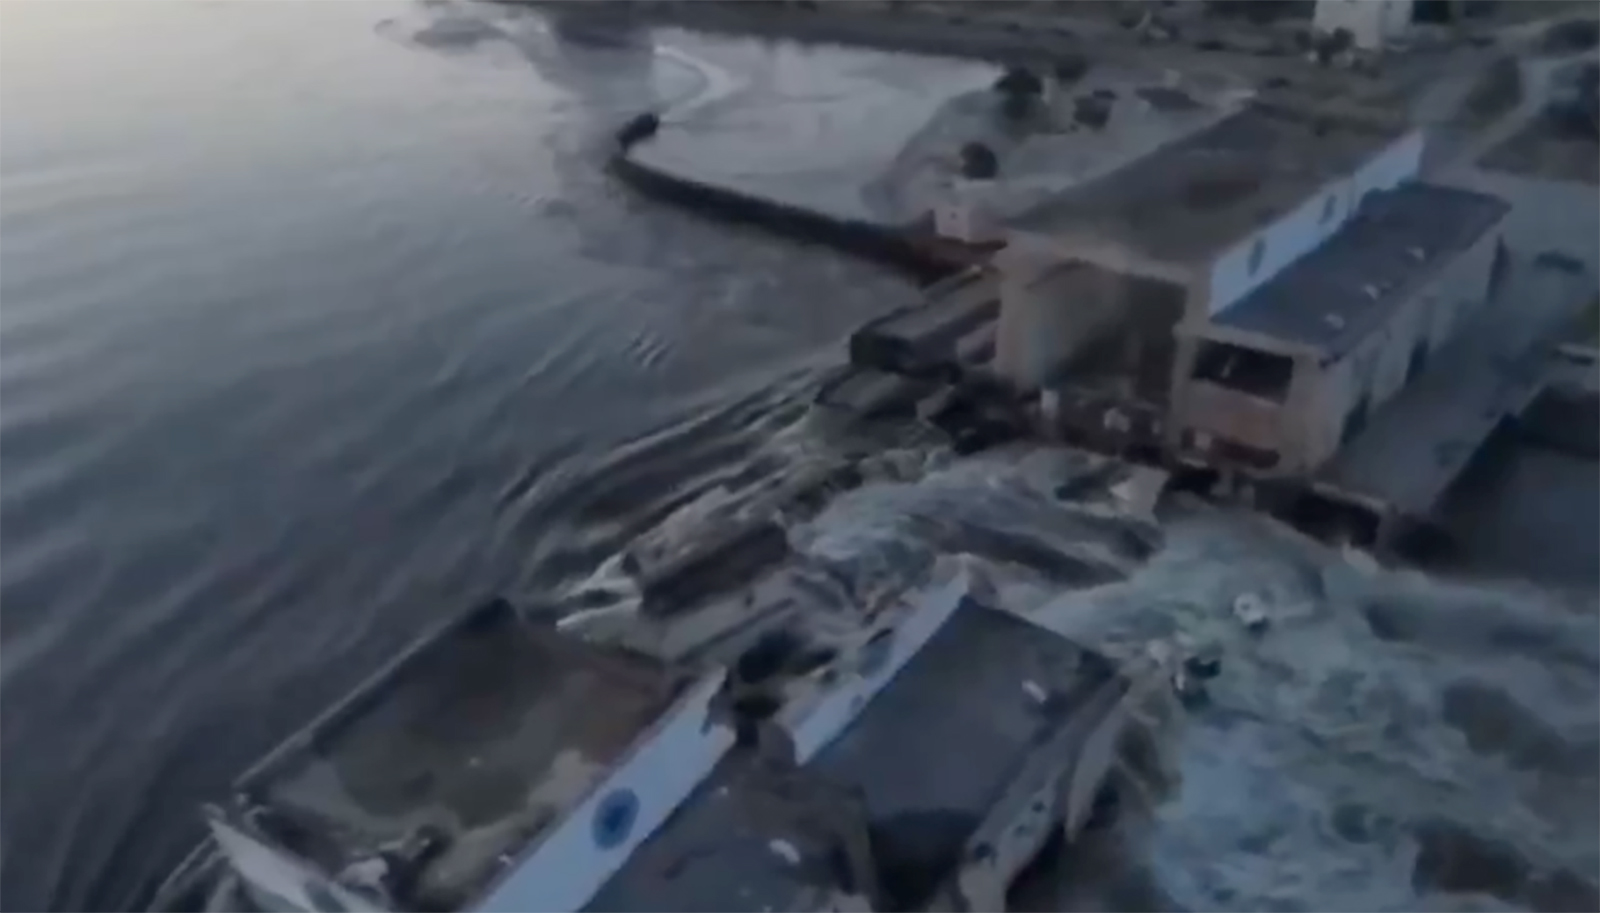 Damage to the Nova Kakhovka dam in southern Ukraine is seen in a screengrab from a social media video.